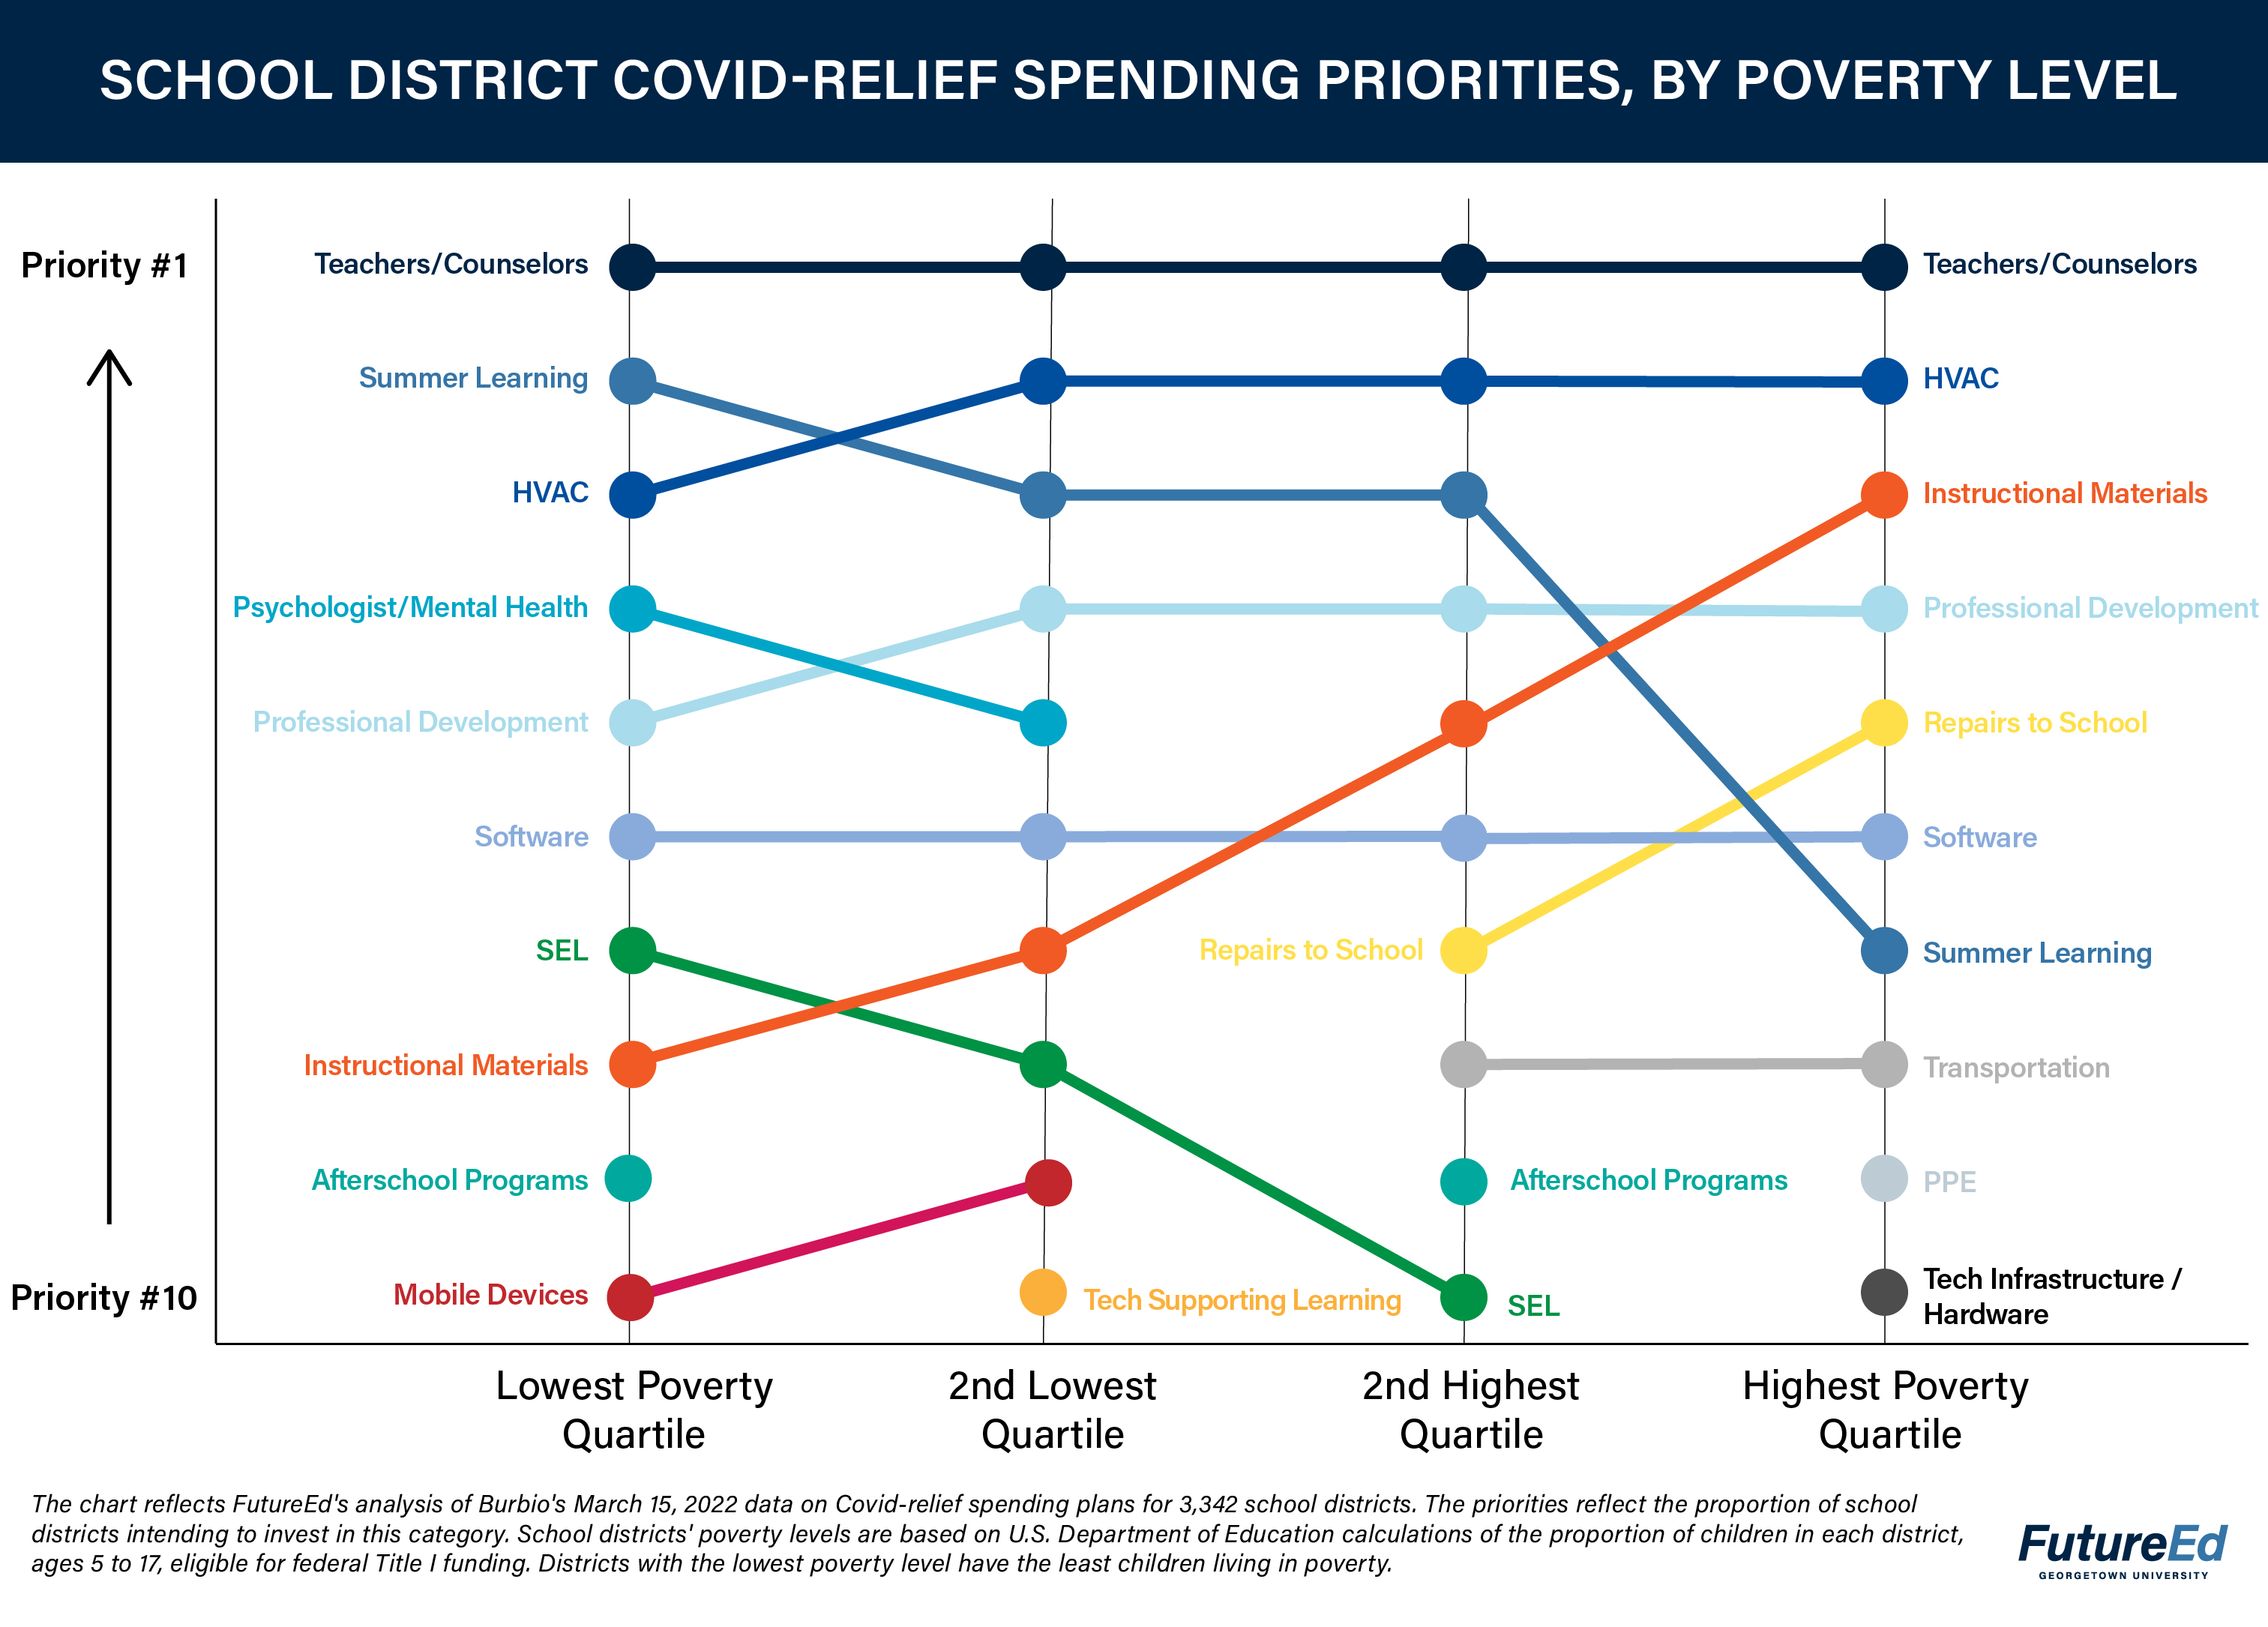 A thumbnail version of a chart showing school district Covid-relief spending priorities, by poverty level